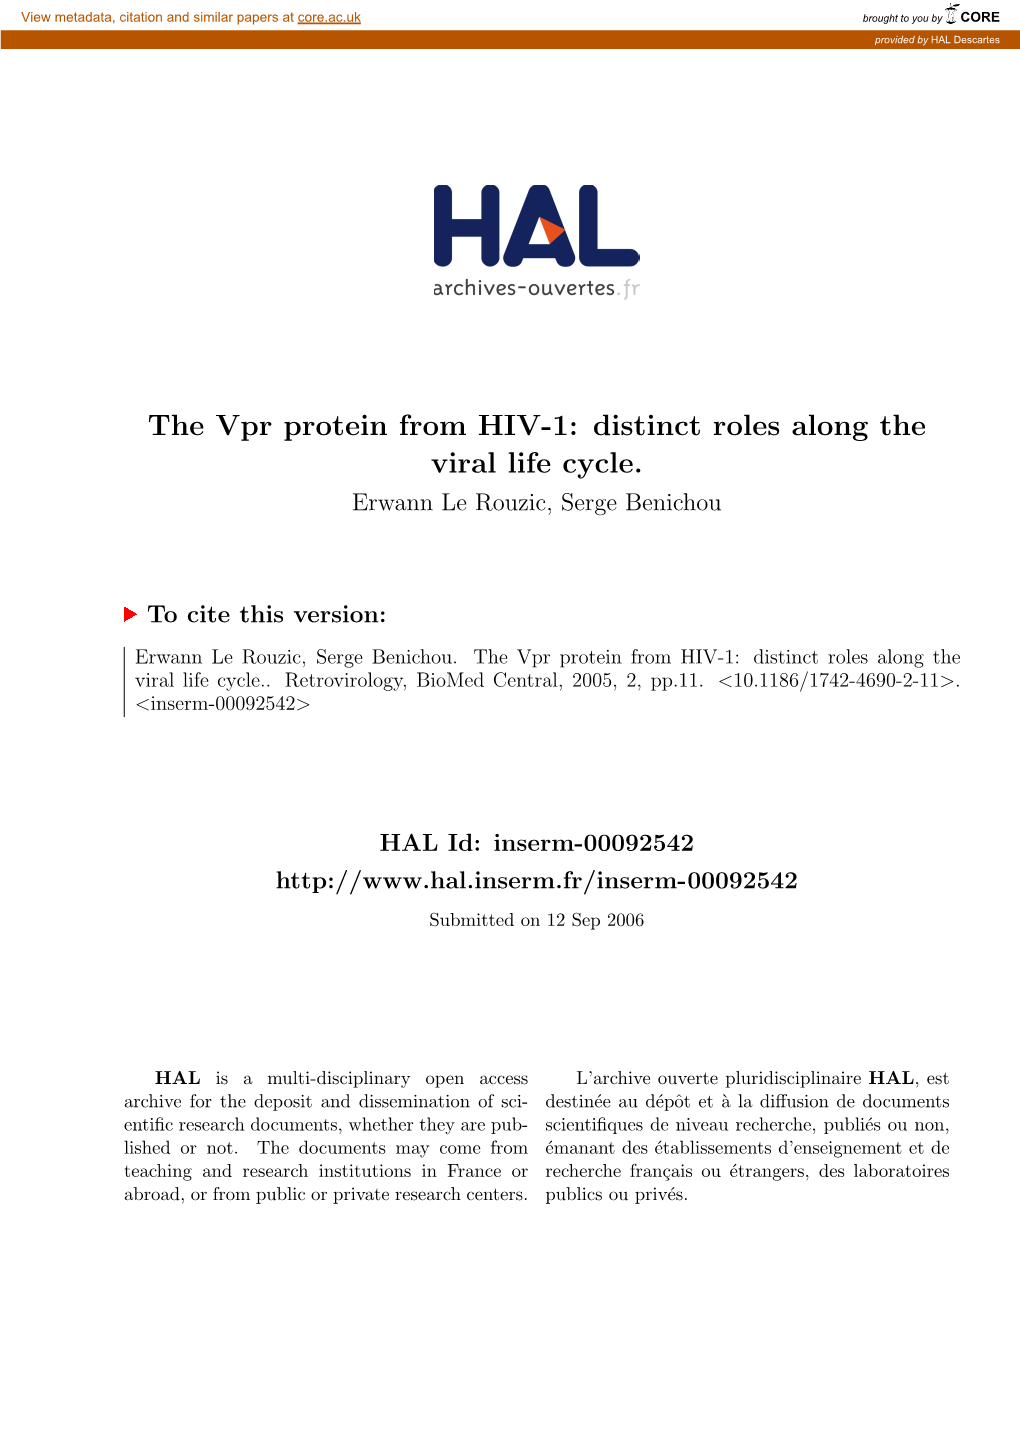 The Vpr Protein from HIV-1: Distinct Roles Along the Viral Life Cycle